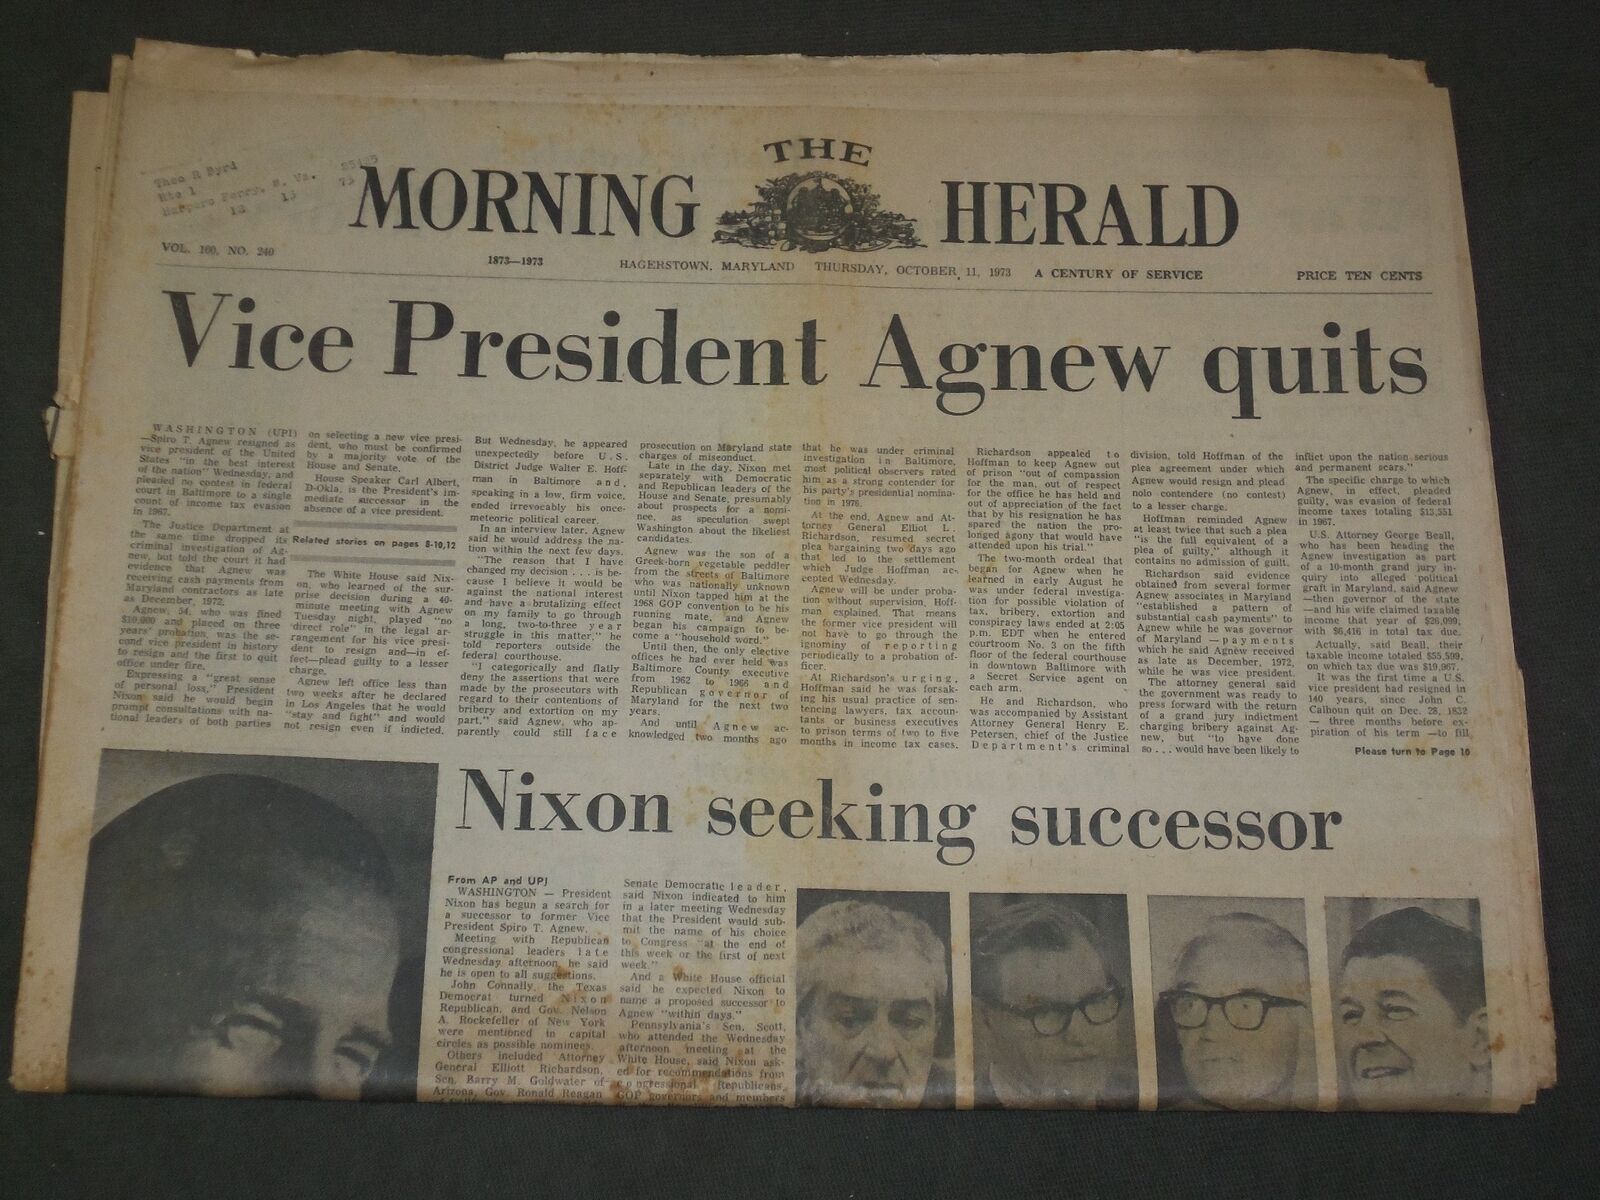 1973 OCTOBER 11 THE MORNING HERALD NEWSPAPER - SPIRO AGNEW QUITS - NP 3298